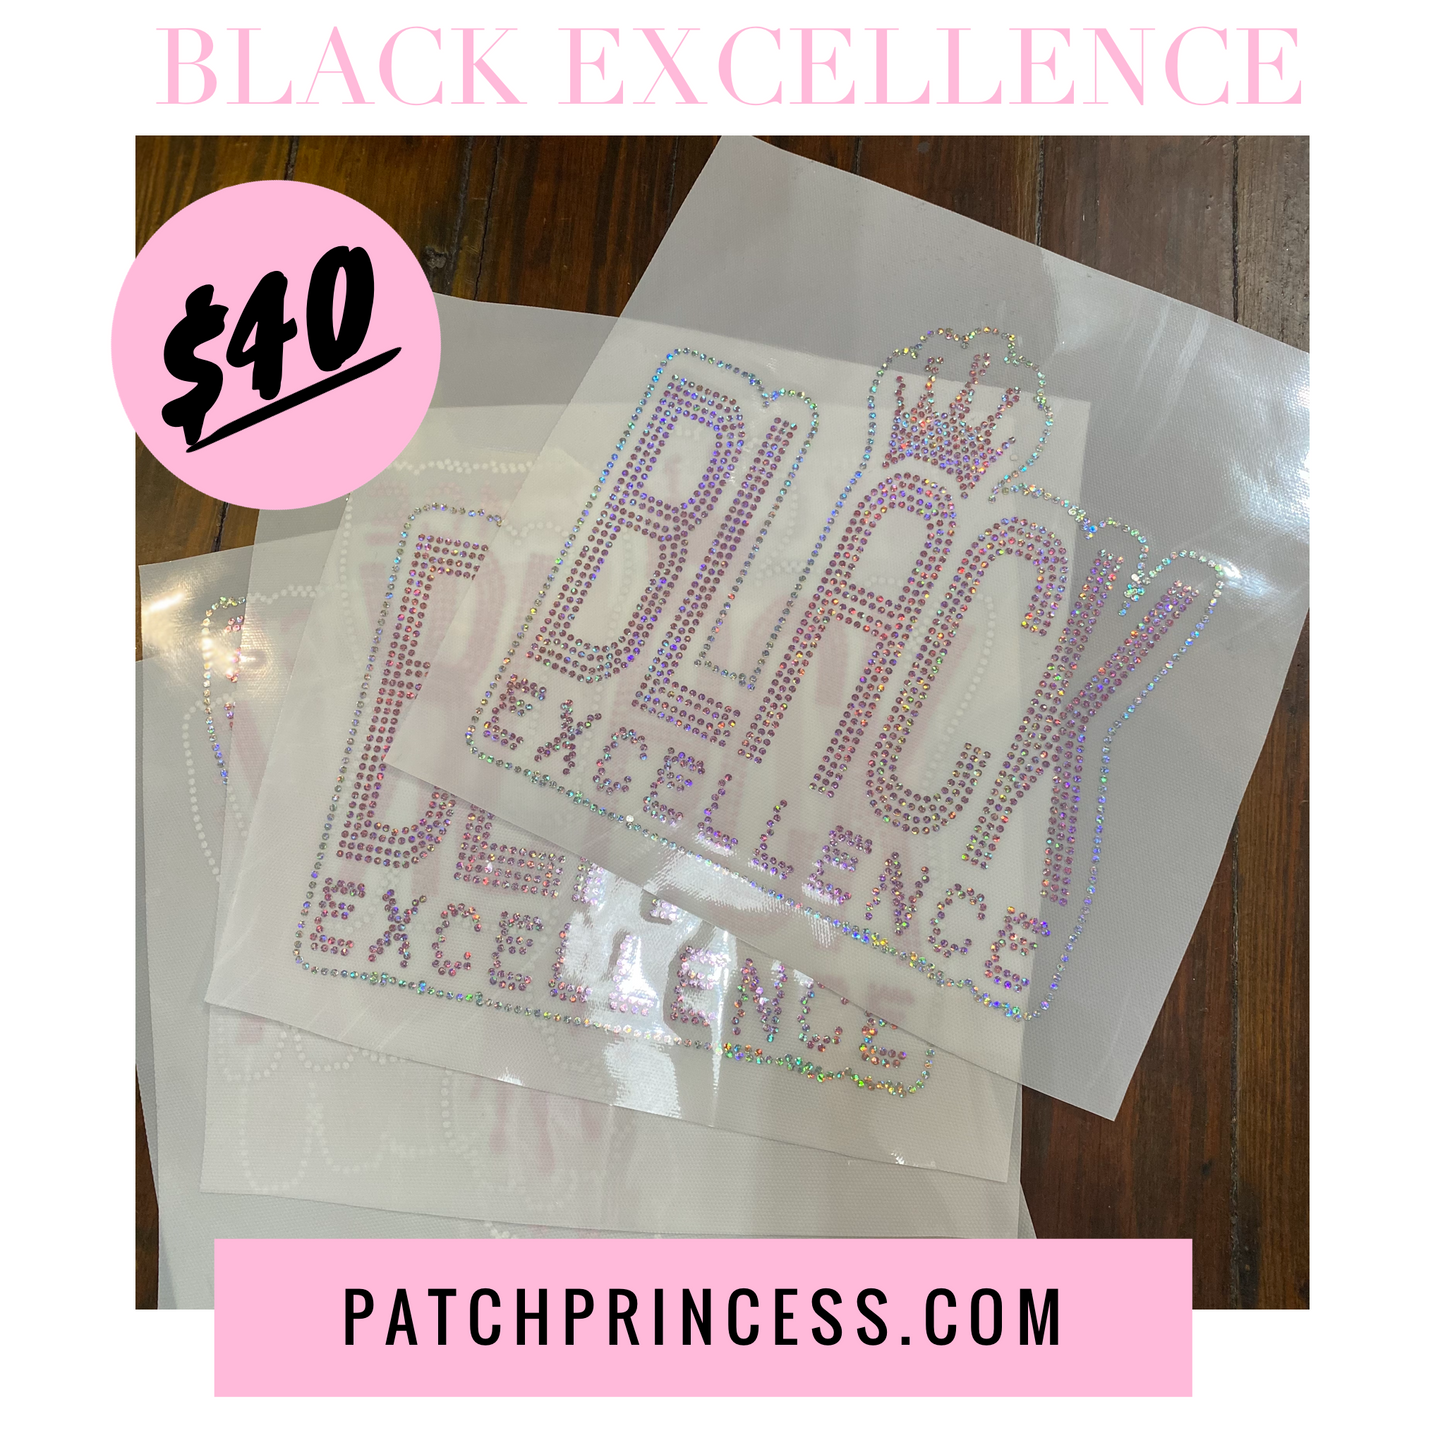 BLACK EXCELLENCE  BLING TRANSFERS